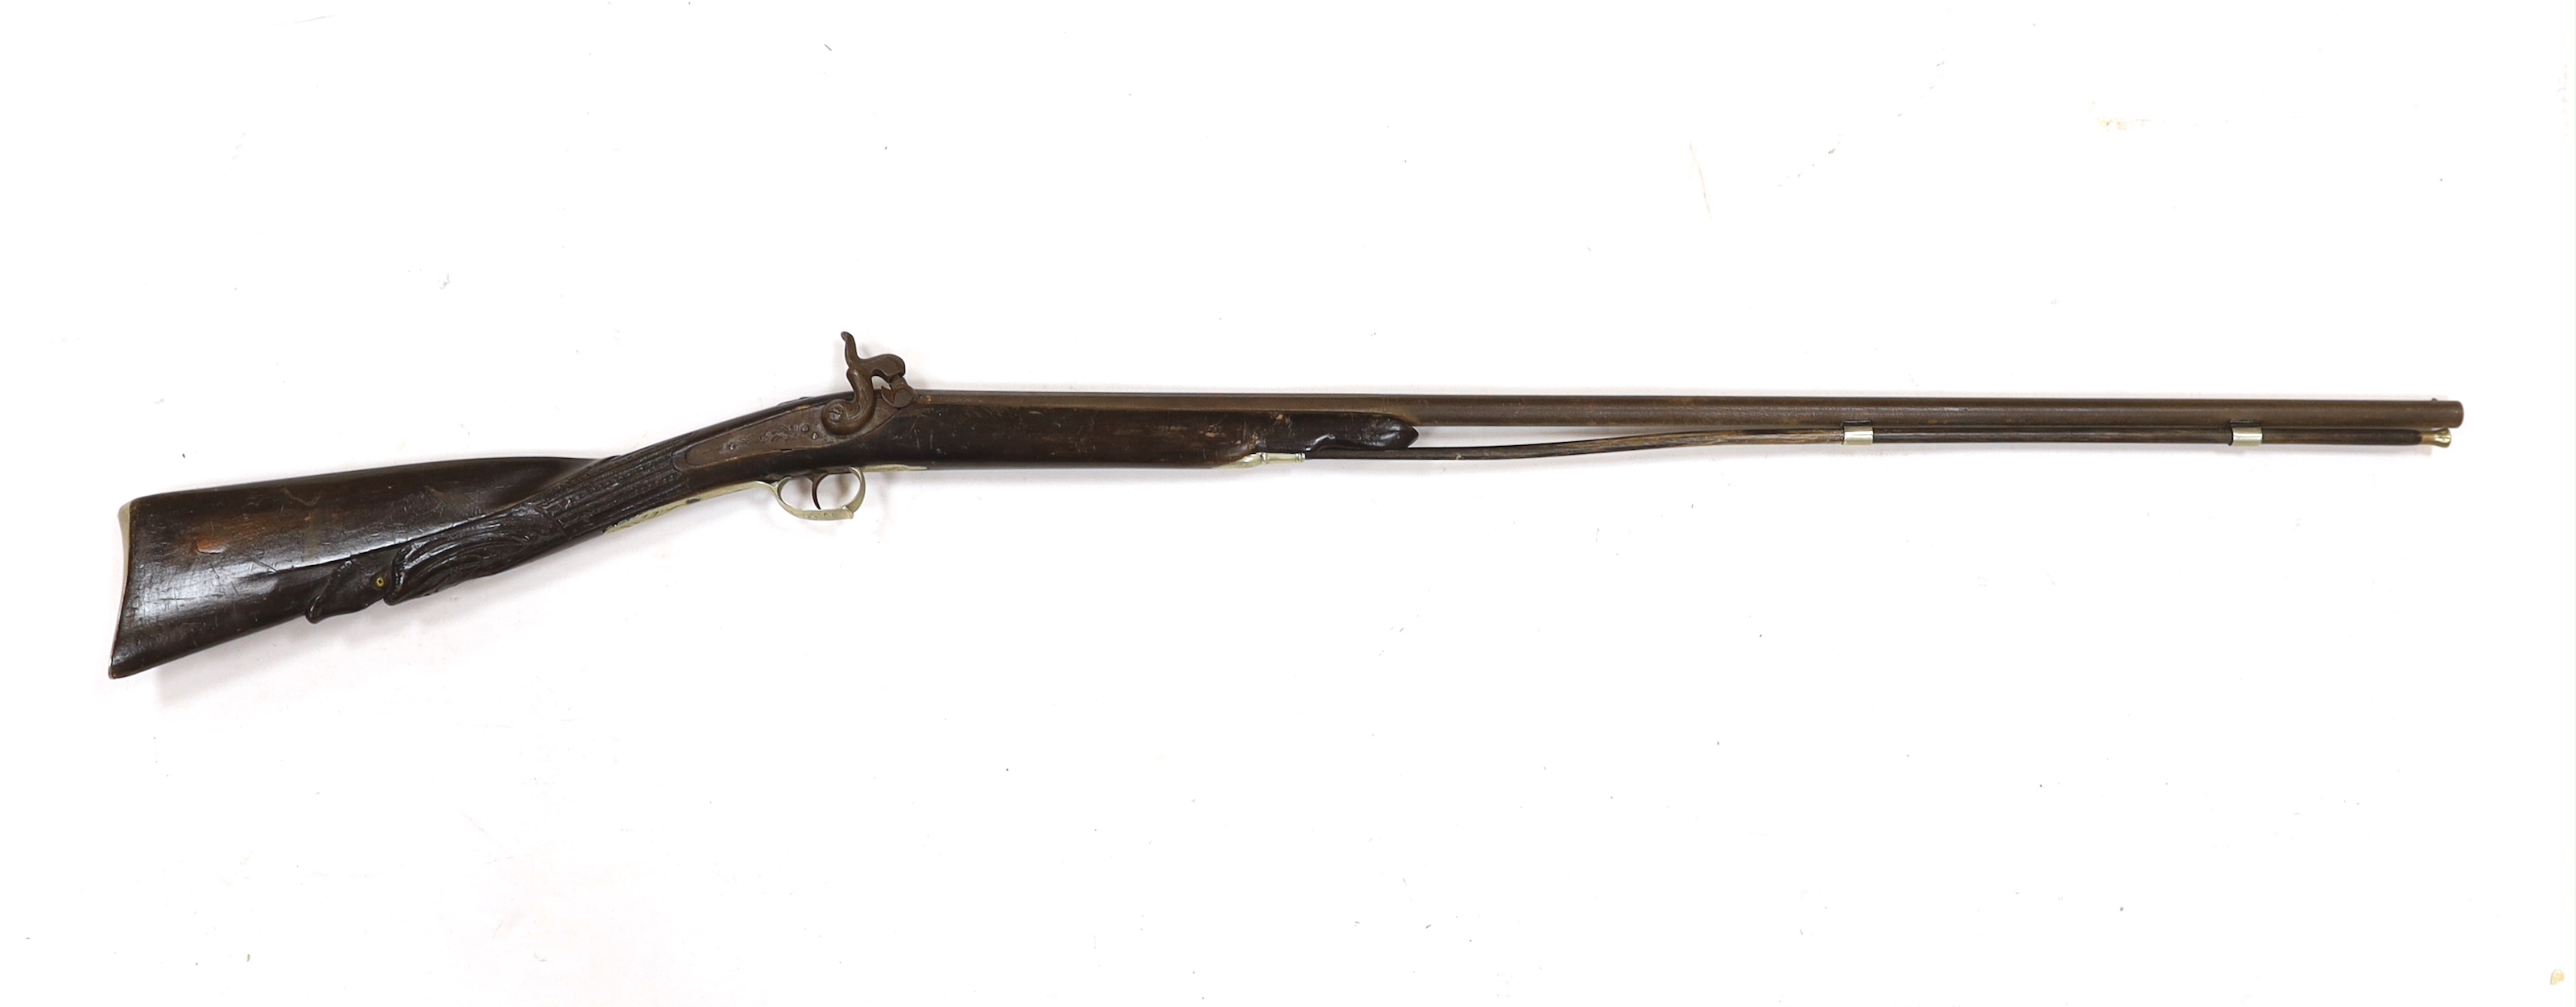 A Belgian back action percussion sporting gun made for the South American market c.1900, with engraved nickel furniture and half stocked barrel, barrel 82cm